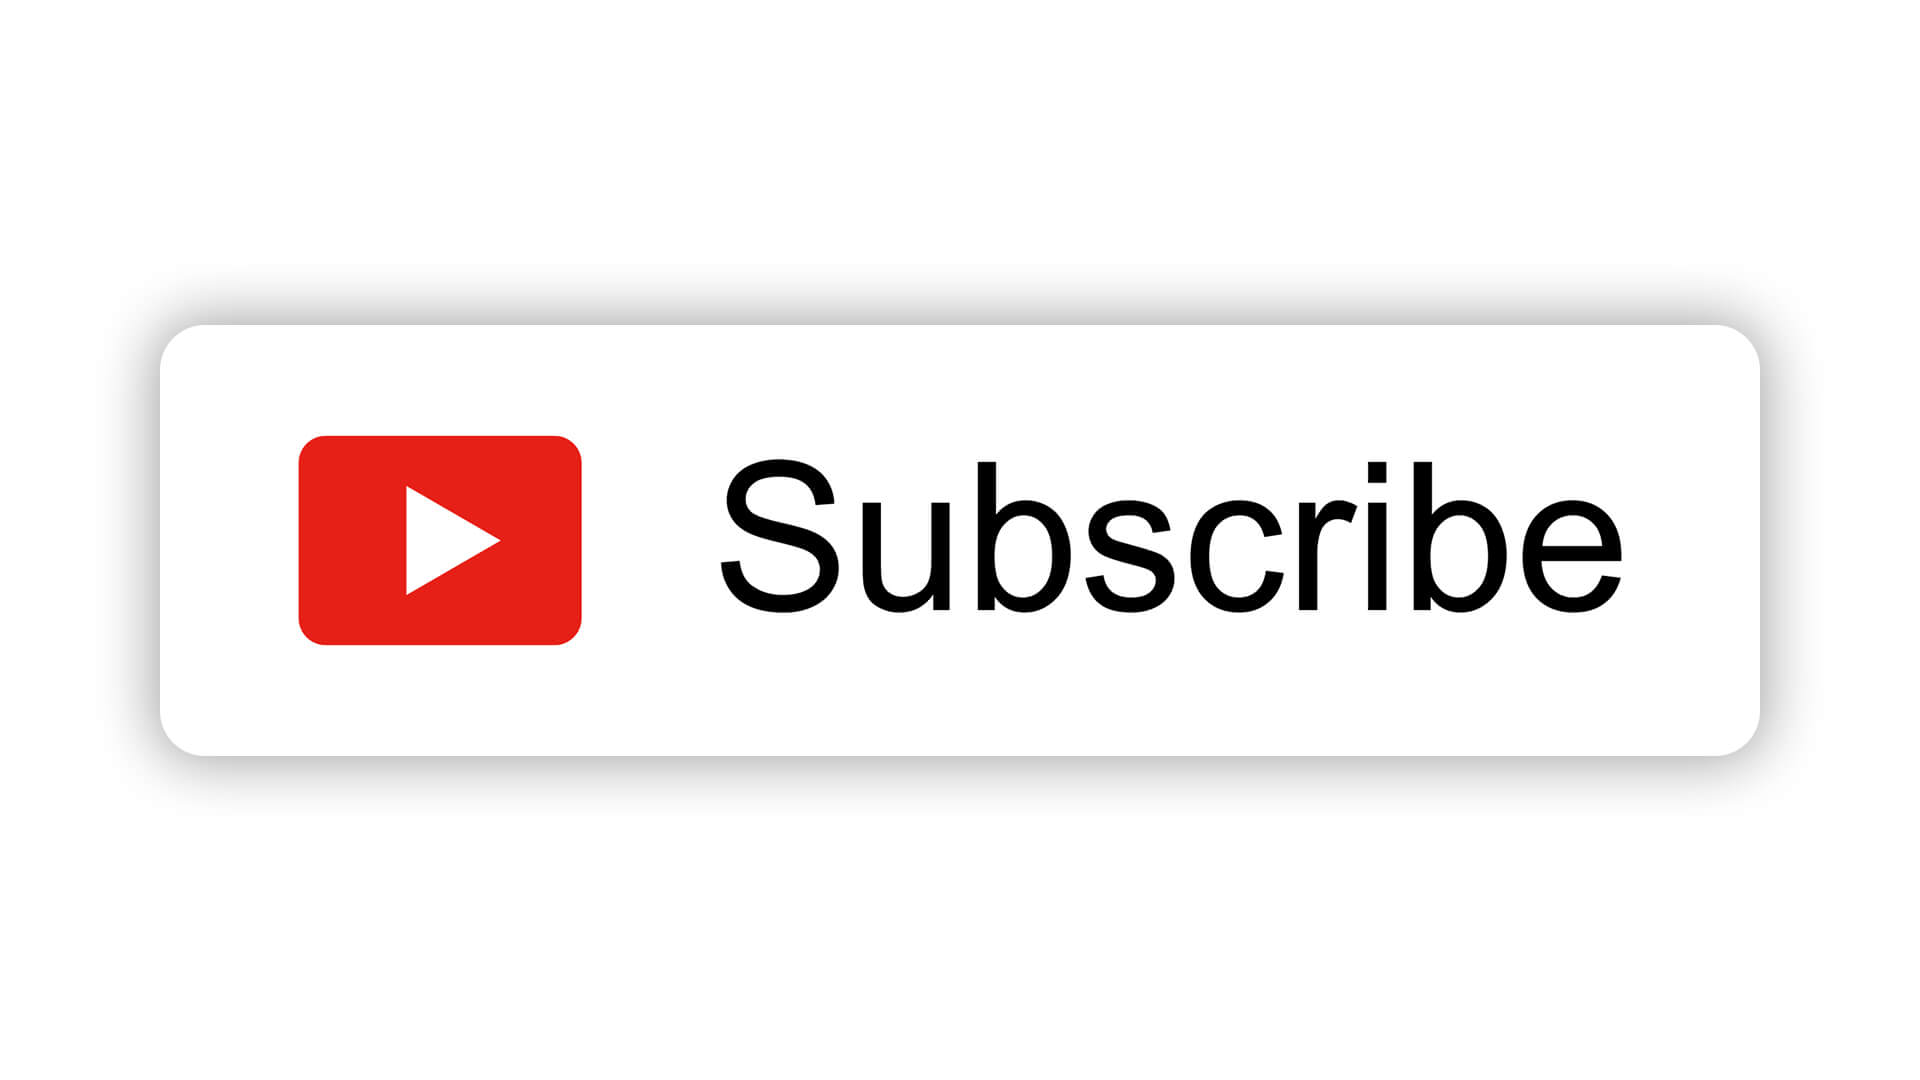 Free YouTube Subscribe Button Download Design Inspiration By AlfredoCreates 15